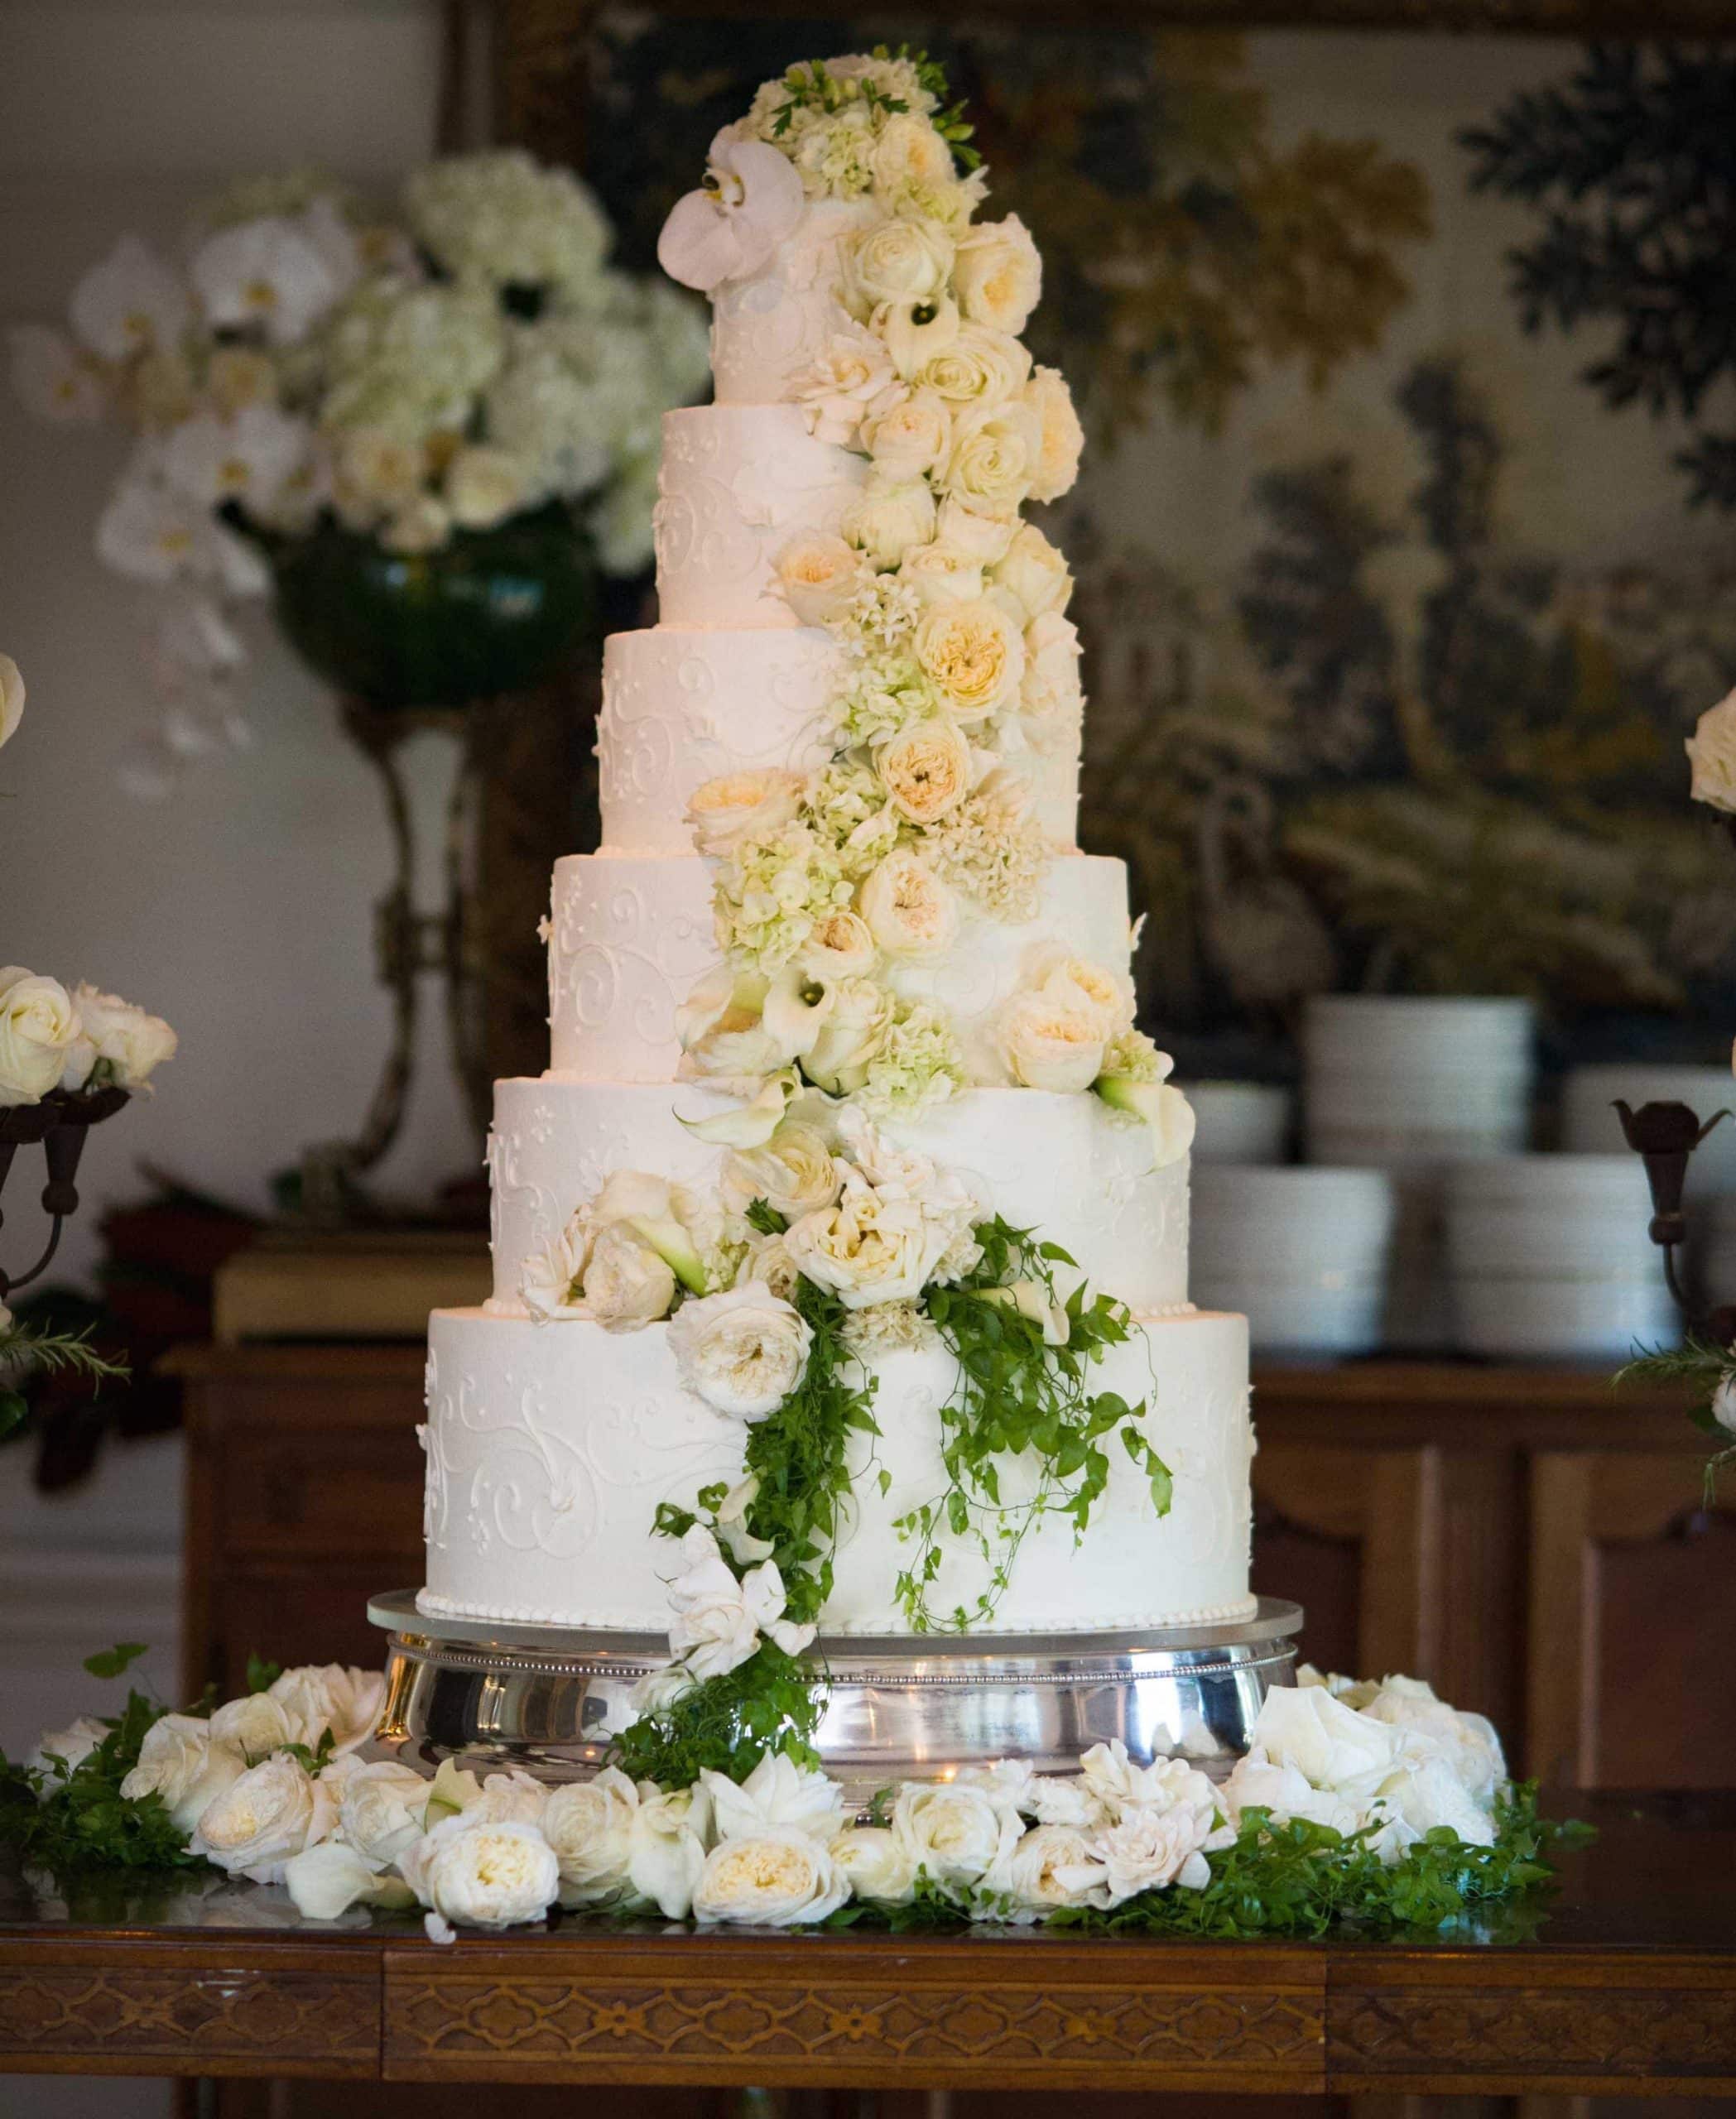 Wedding Cakes: 20 Ways to Decorate with Fresh Flowers